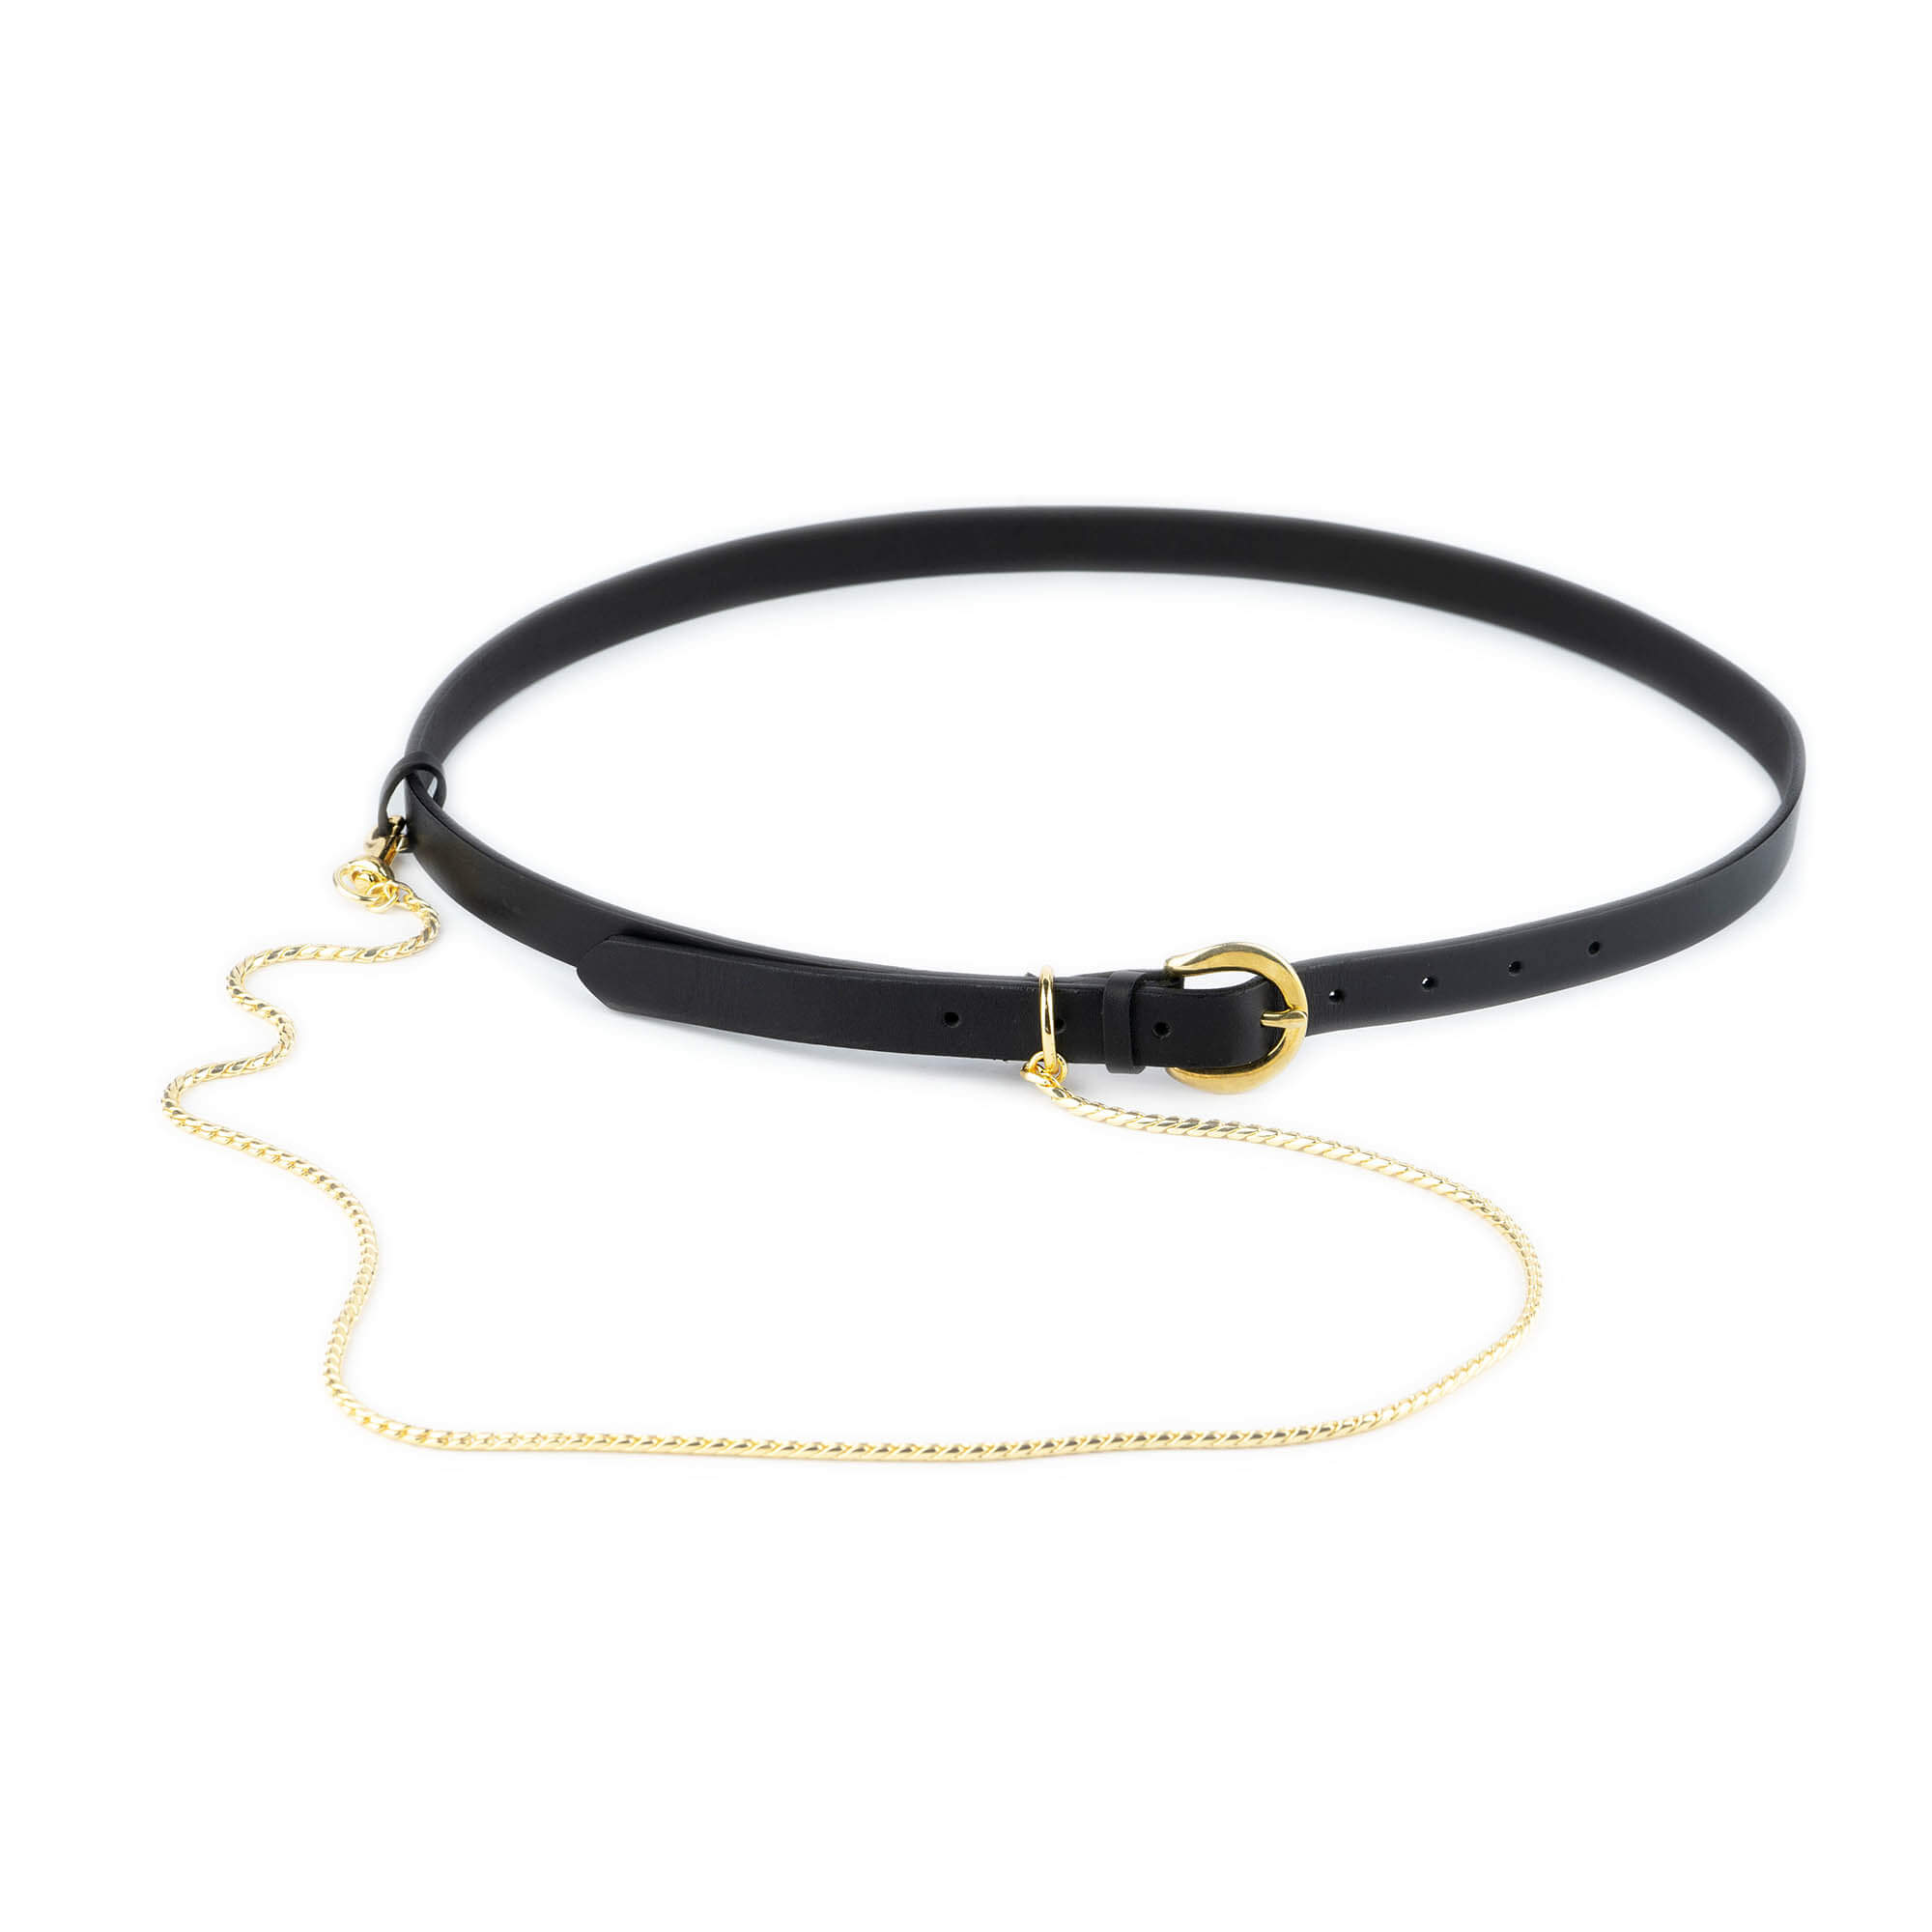 Buy Womens Black Leather Belt With Gold Snake Chain | Capo